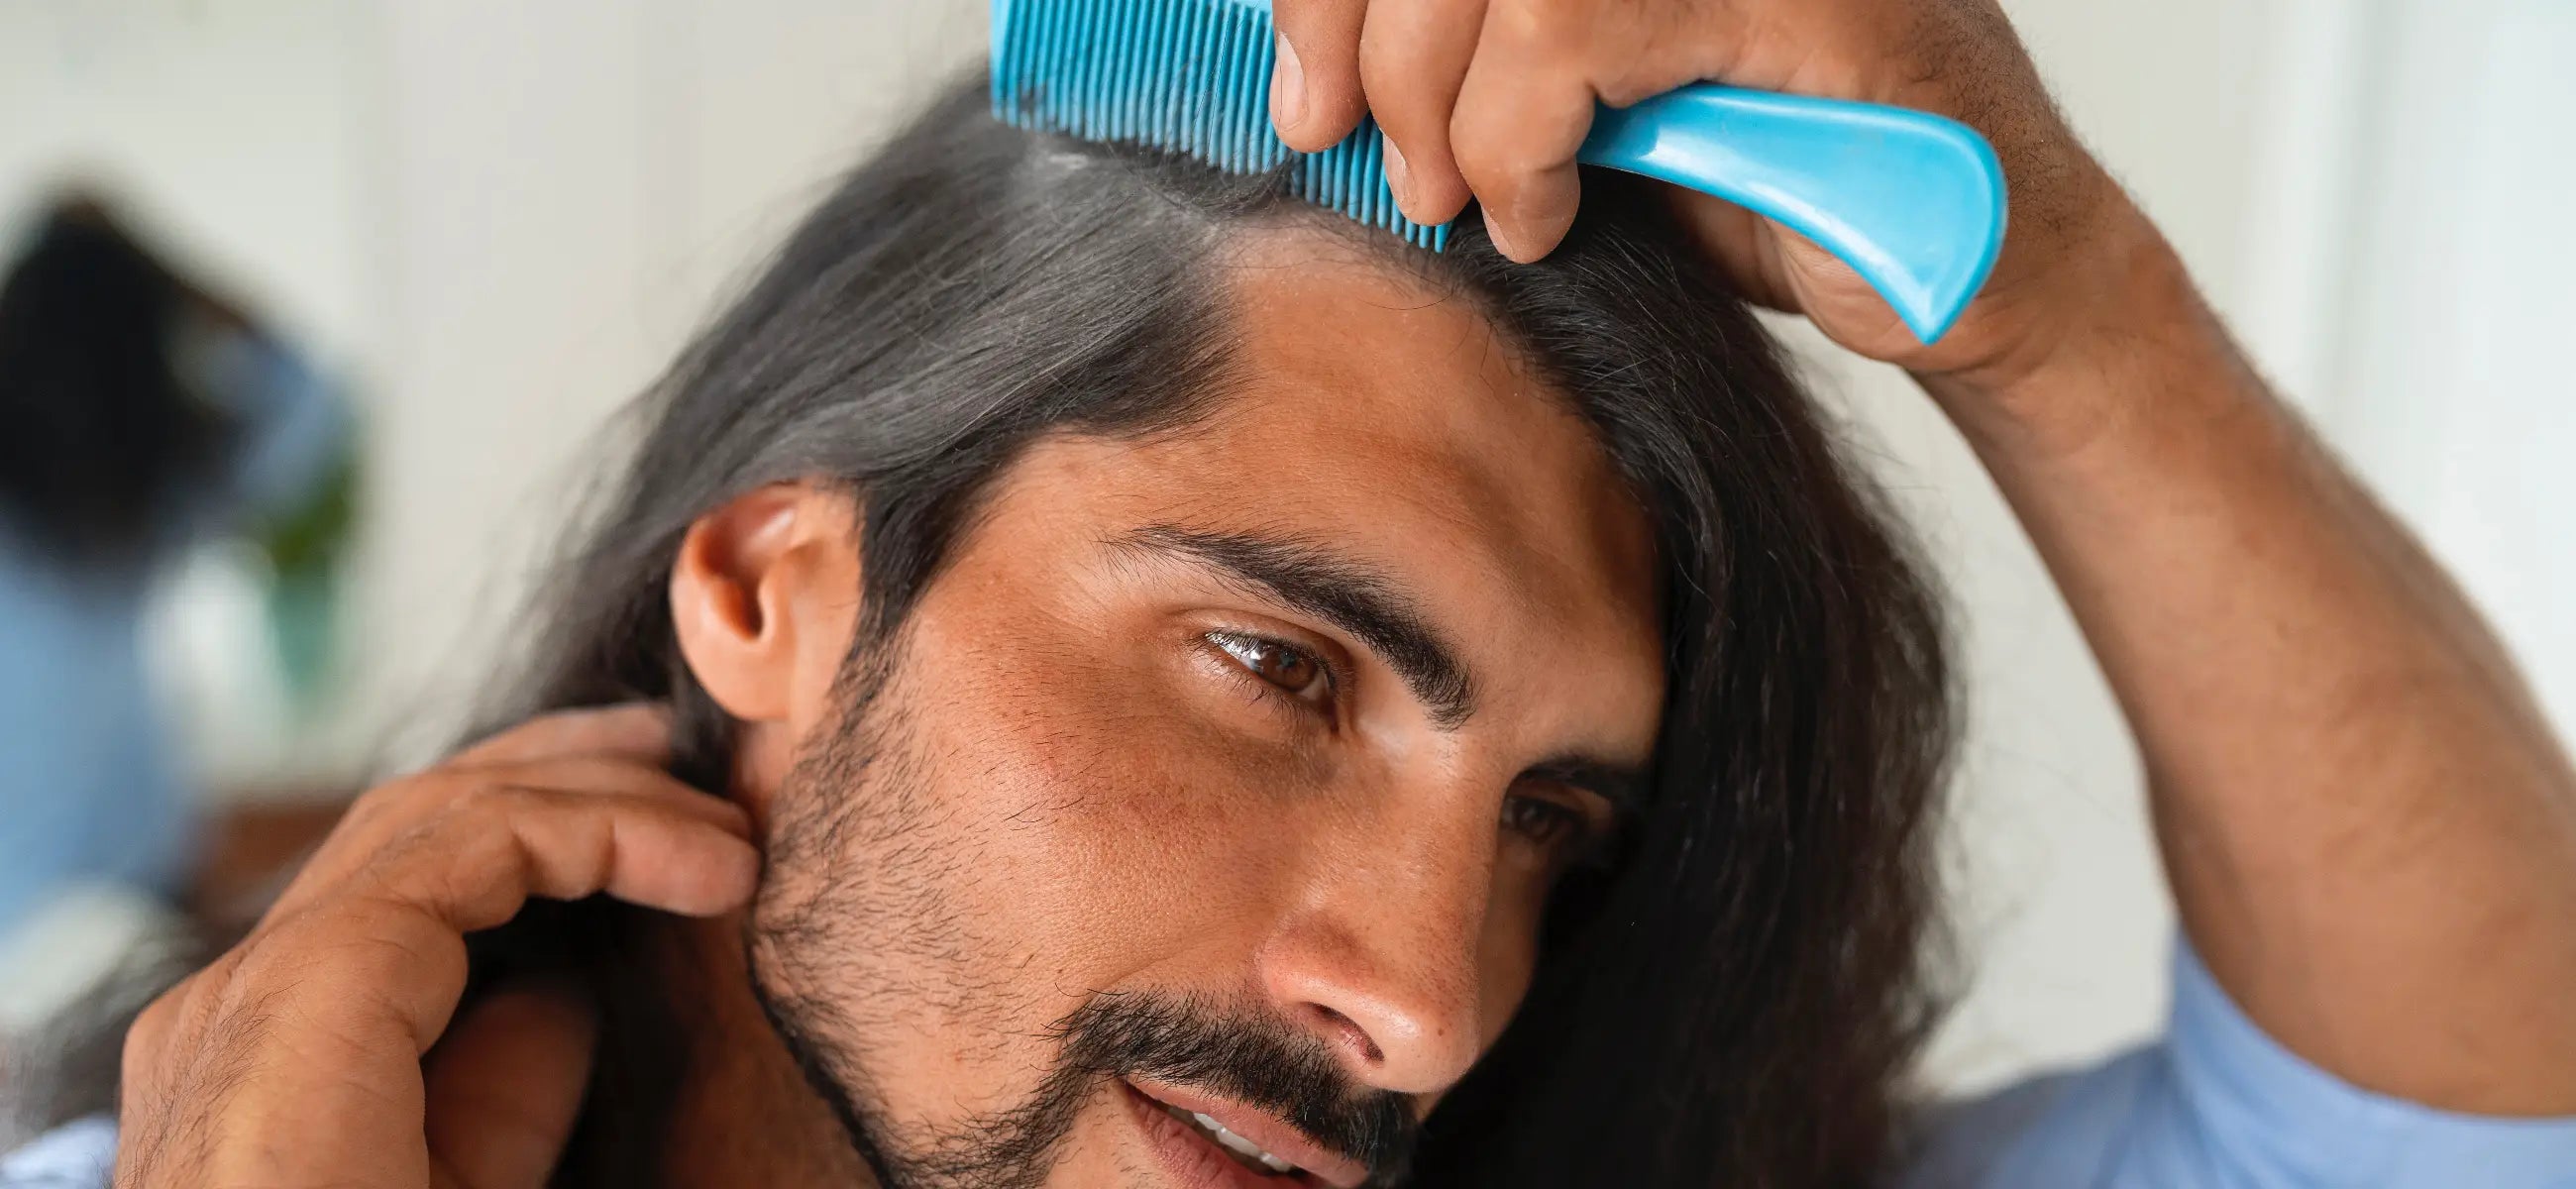 Dry scalp for men: Causes, tips, and products you do not want to miss